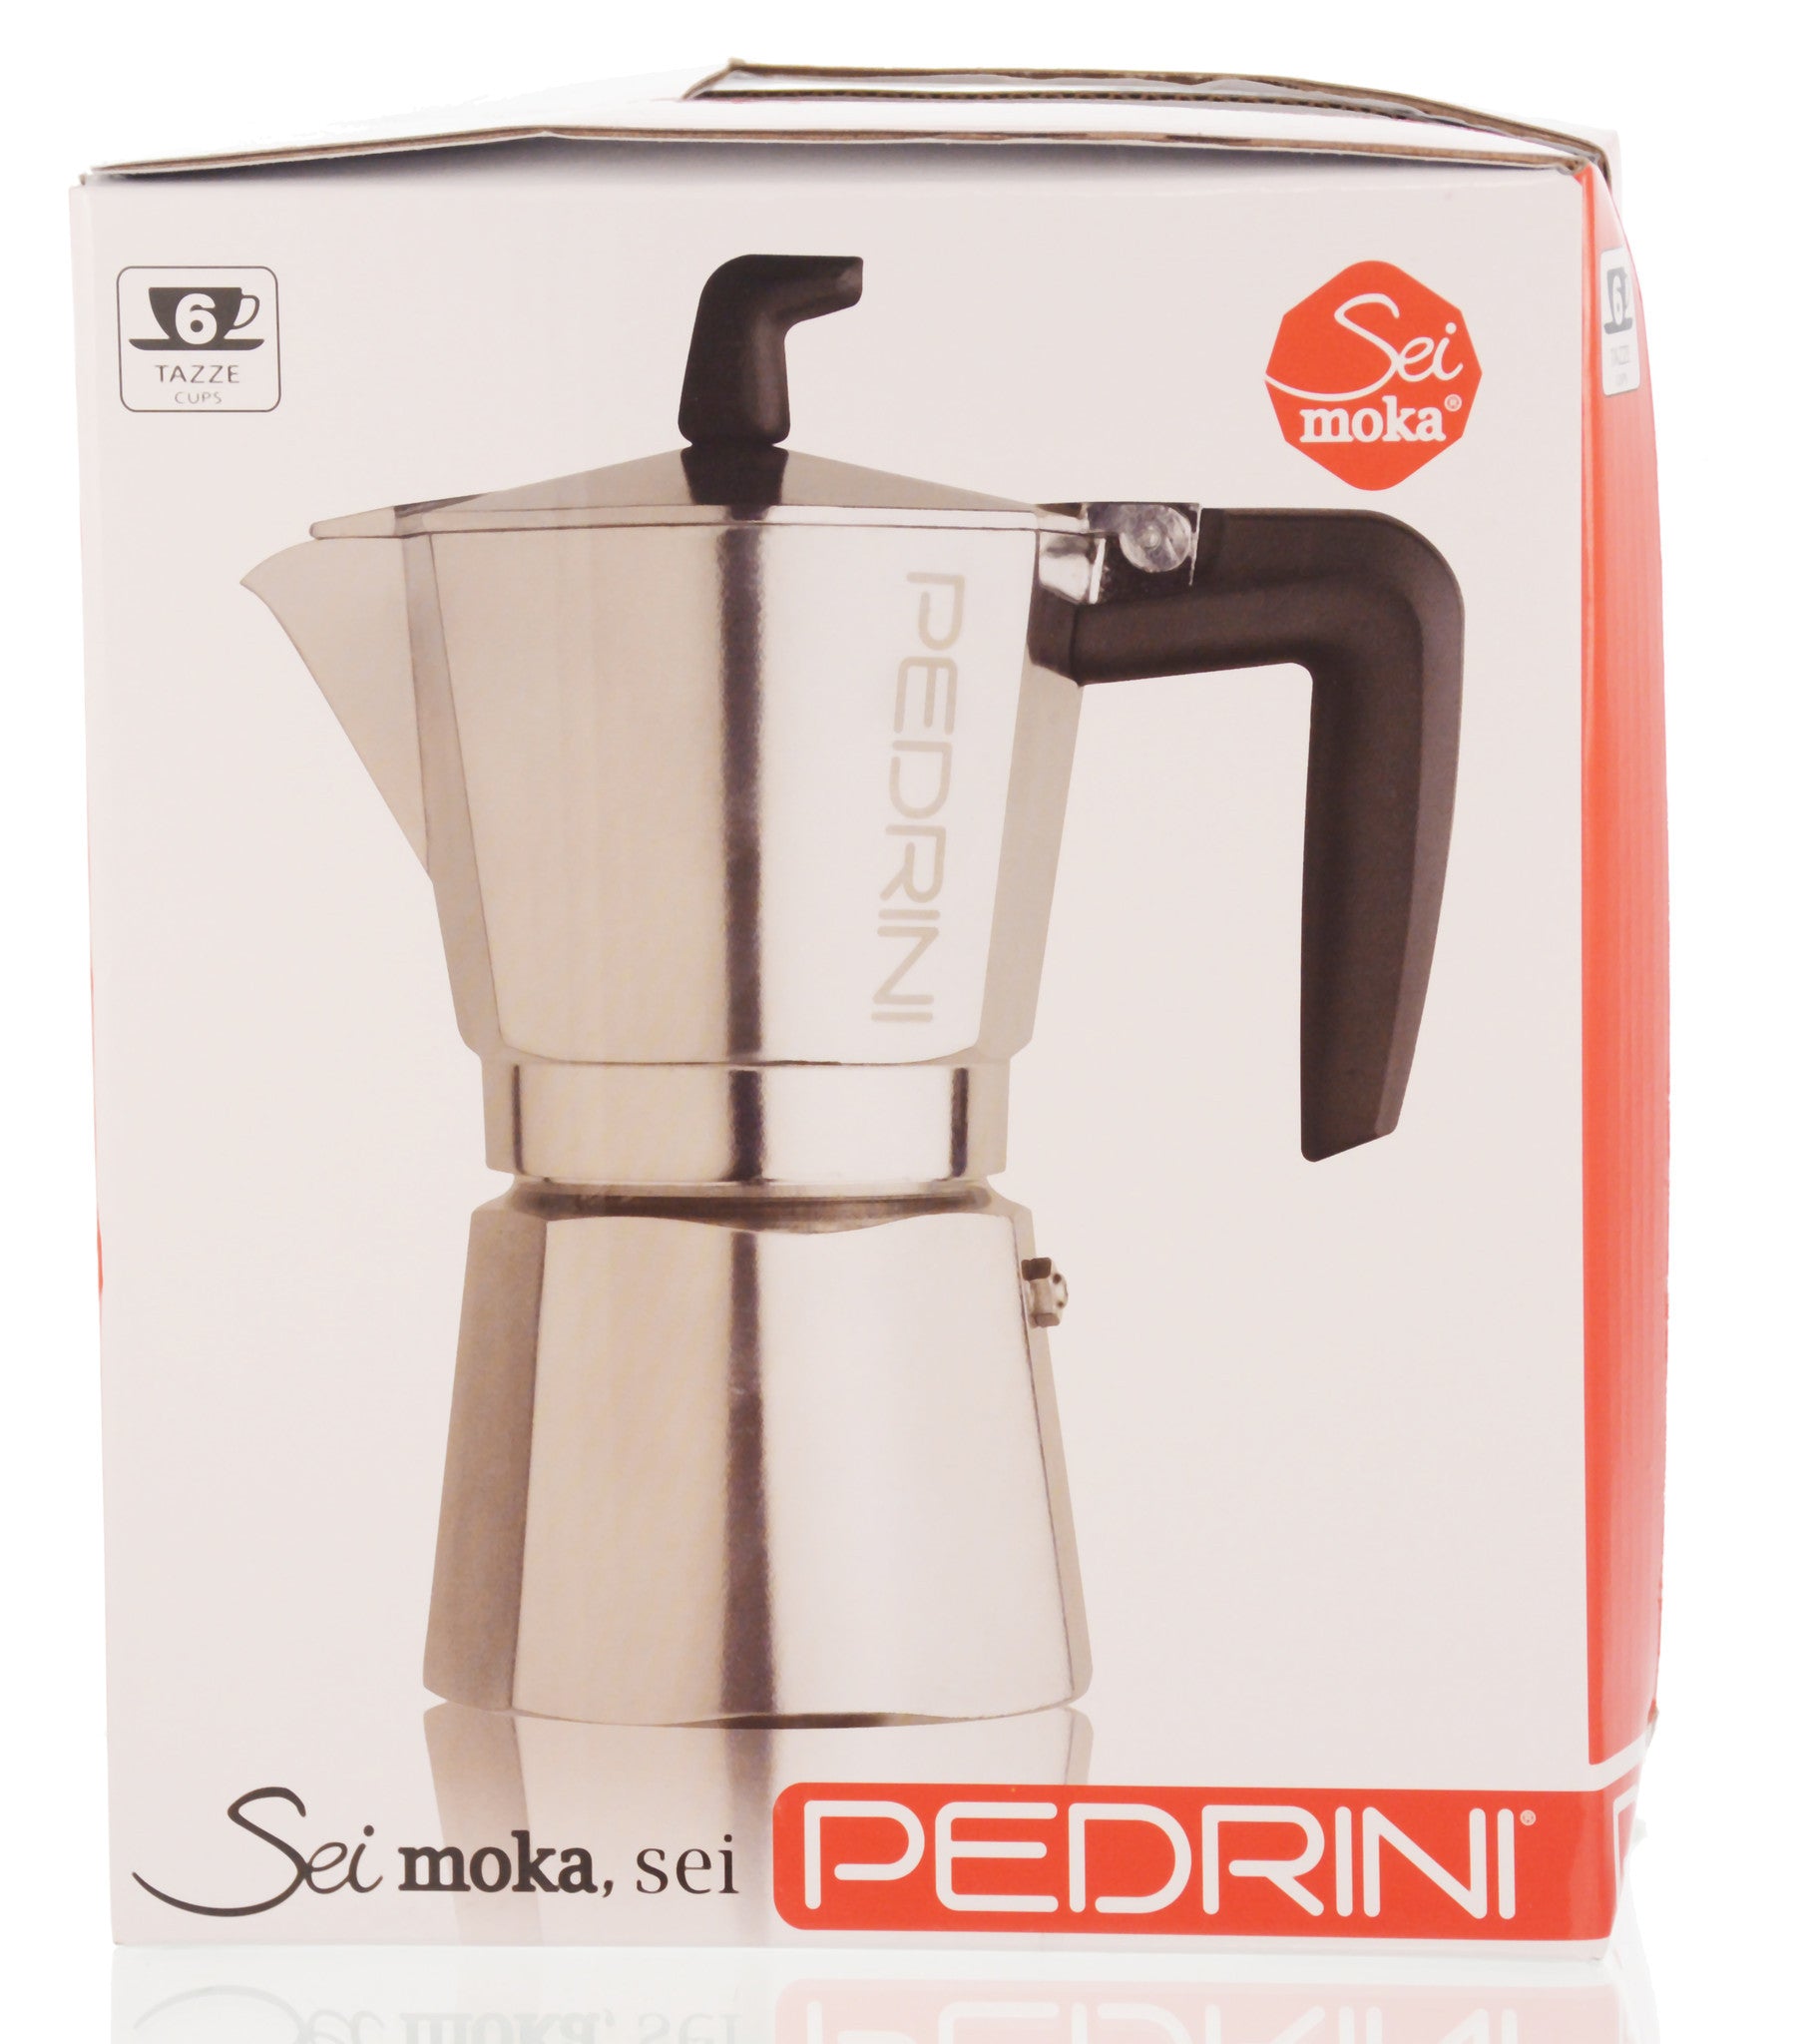 Pedrini Italy Sei Moka Stovetop Espresso Maker with Marble or Silver Finish  1 cup, 2 cup, 3 cup, 6 cup 